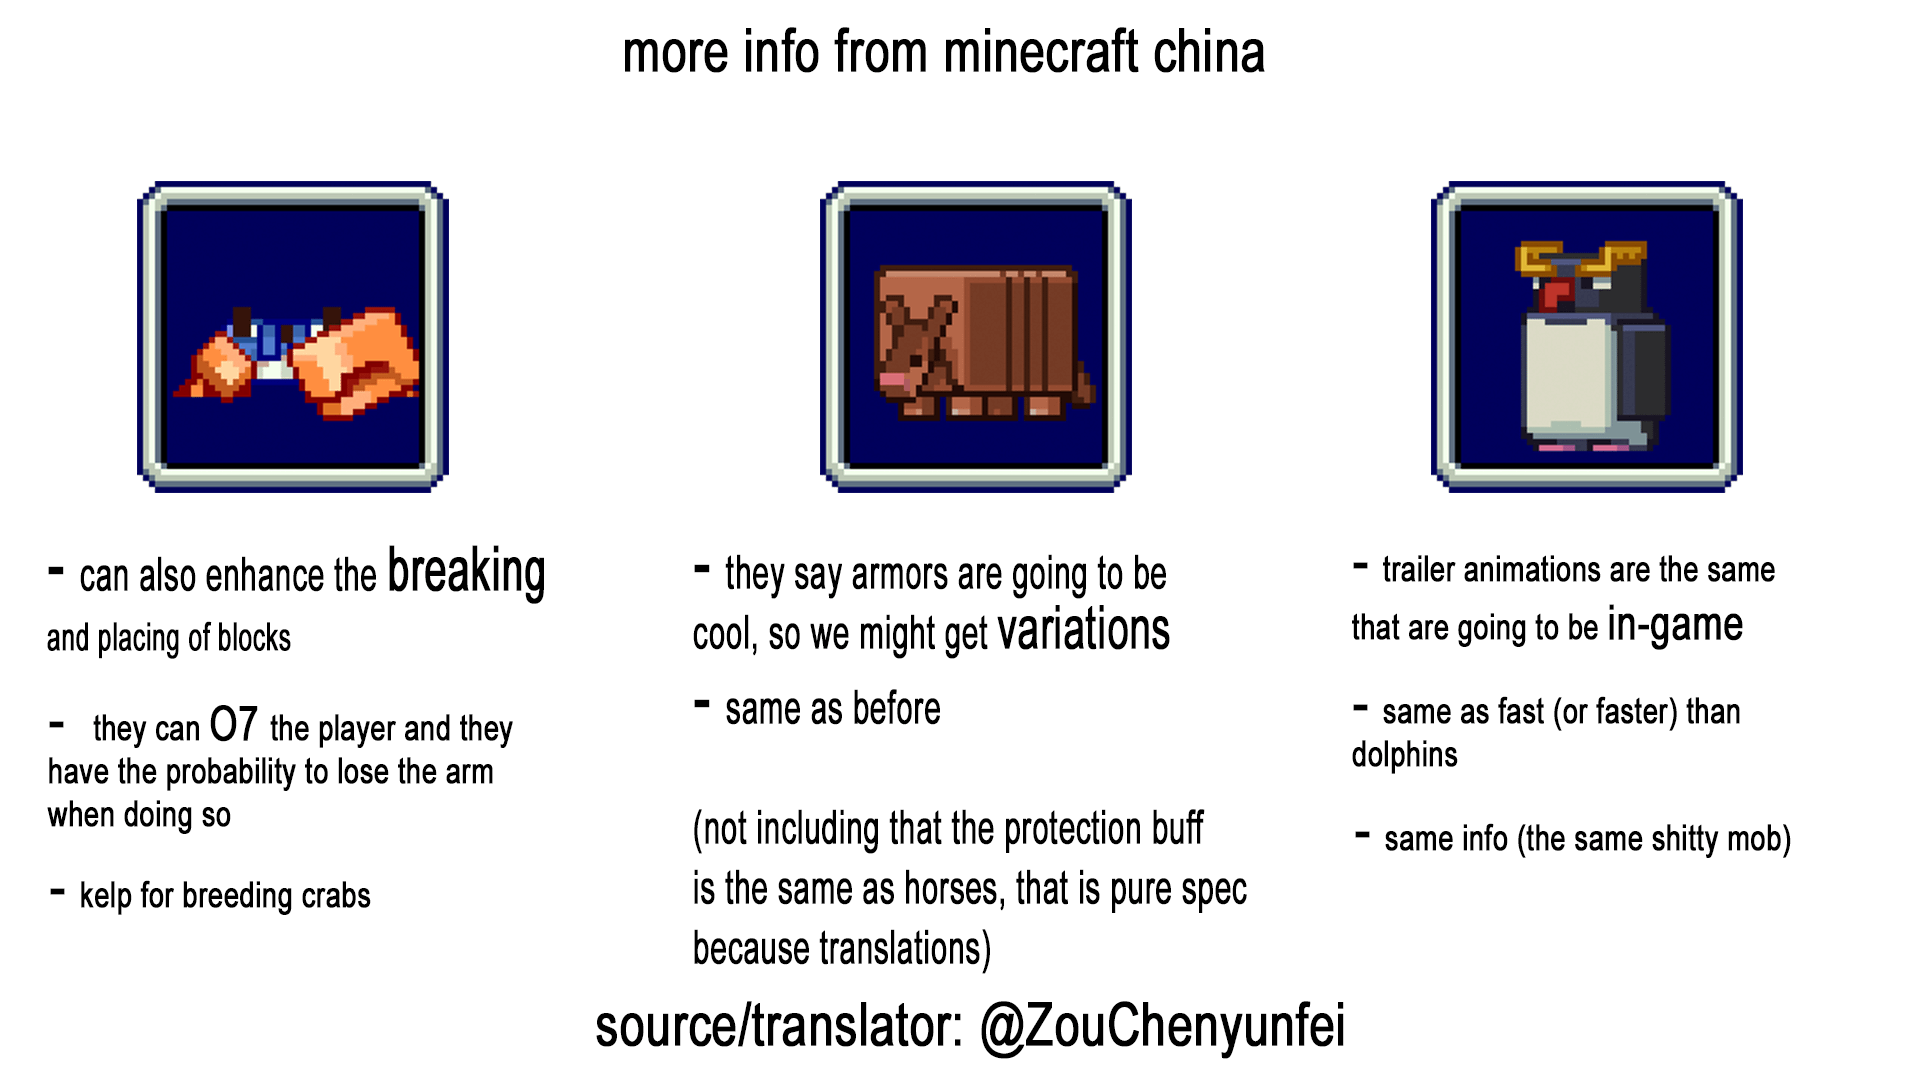 Minecraft Memes - shouldn't be here, but more Minecraft China info